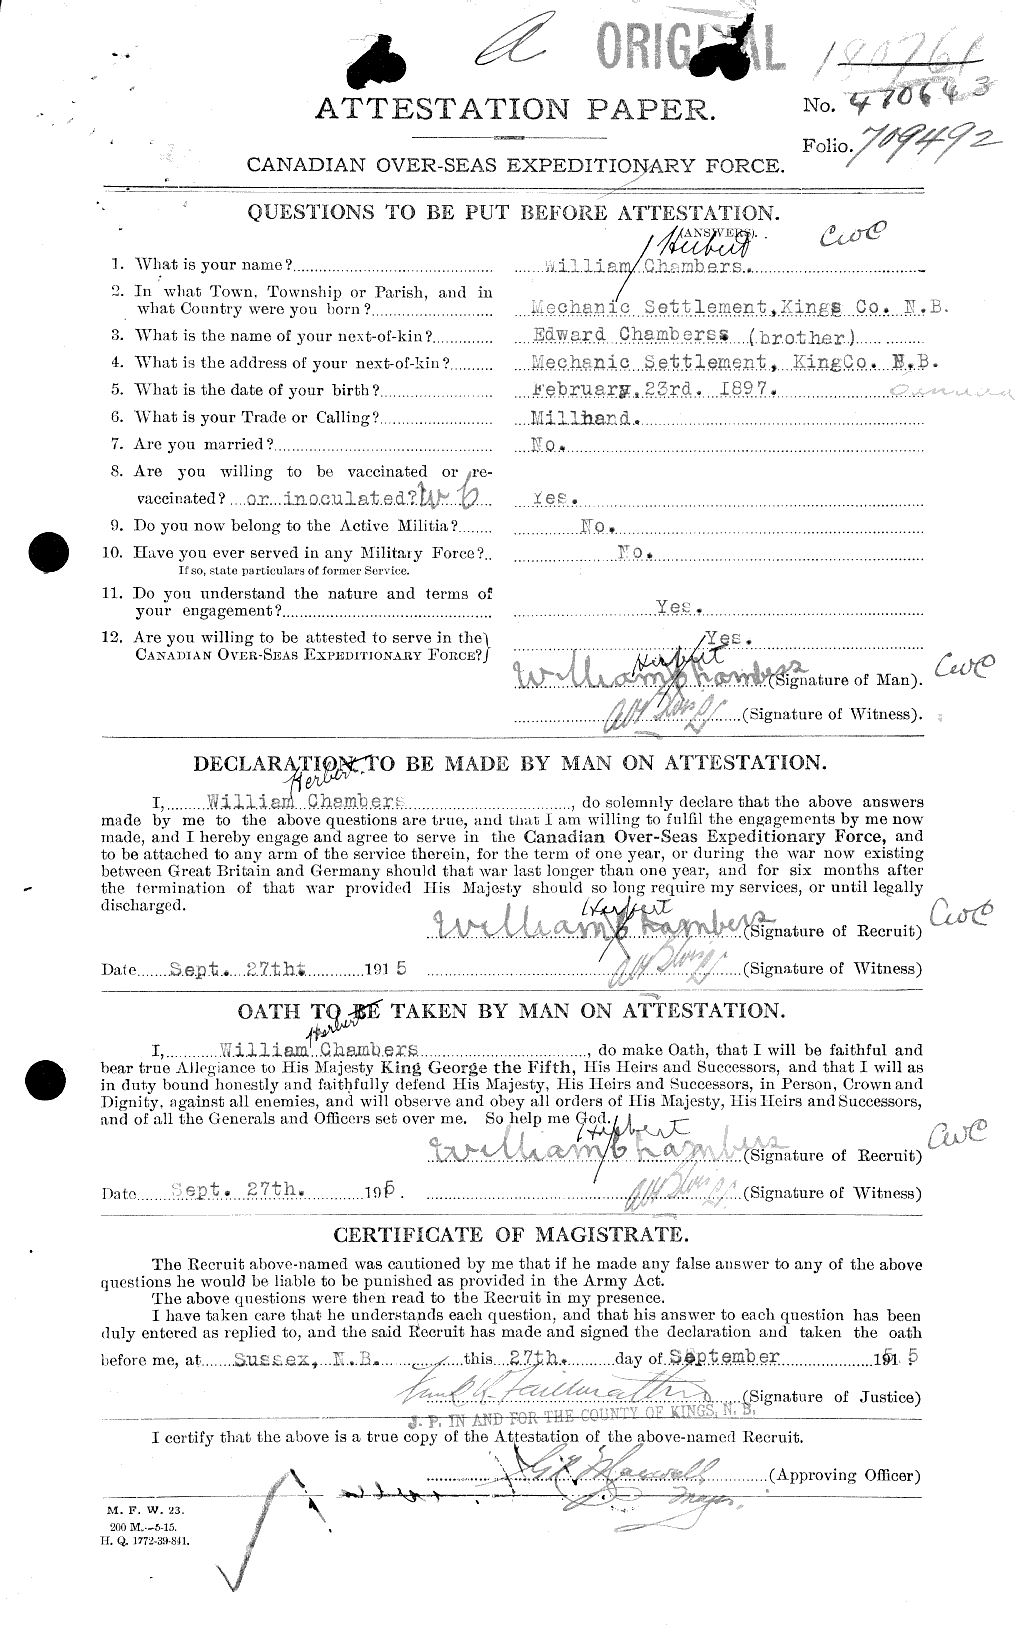 Personnel Records of the First World War - CEF 016936a